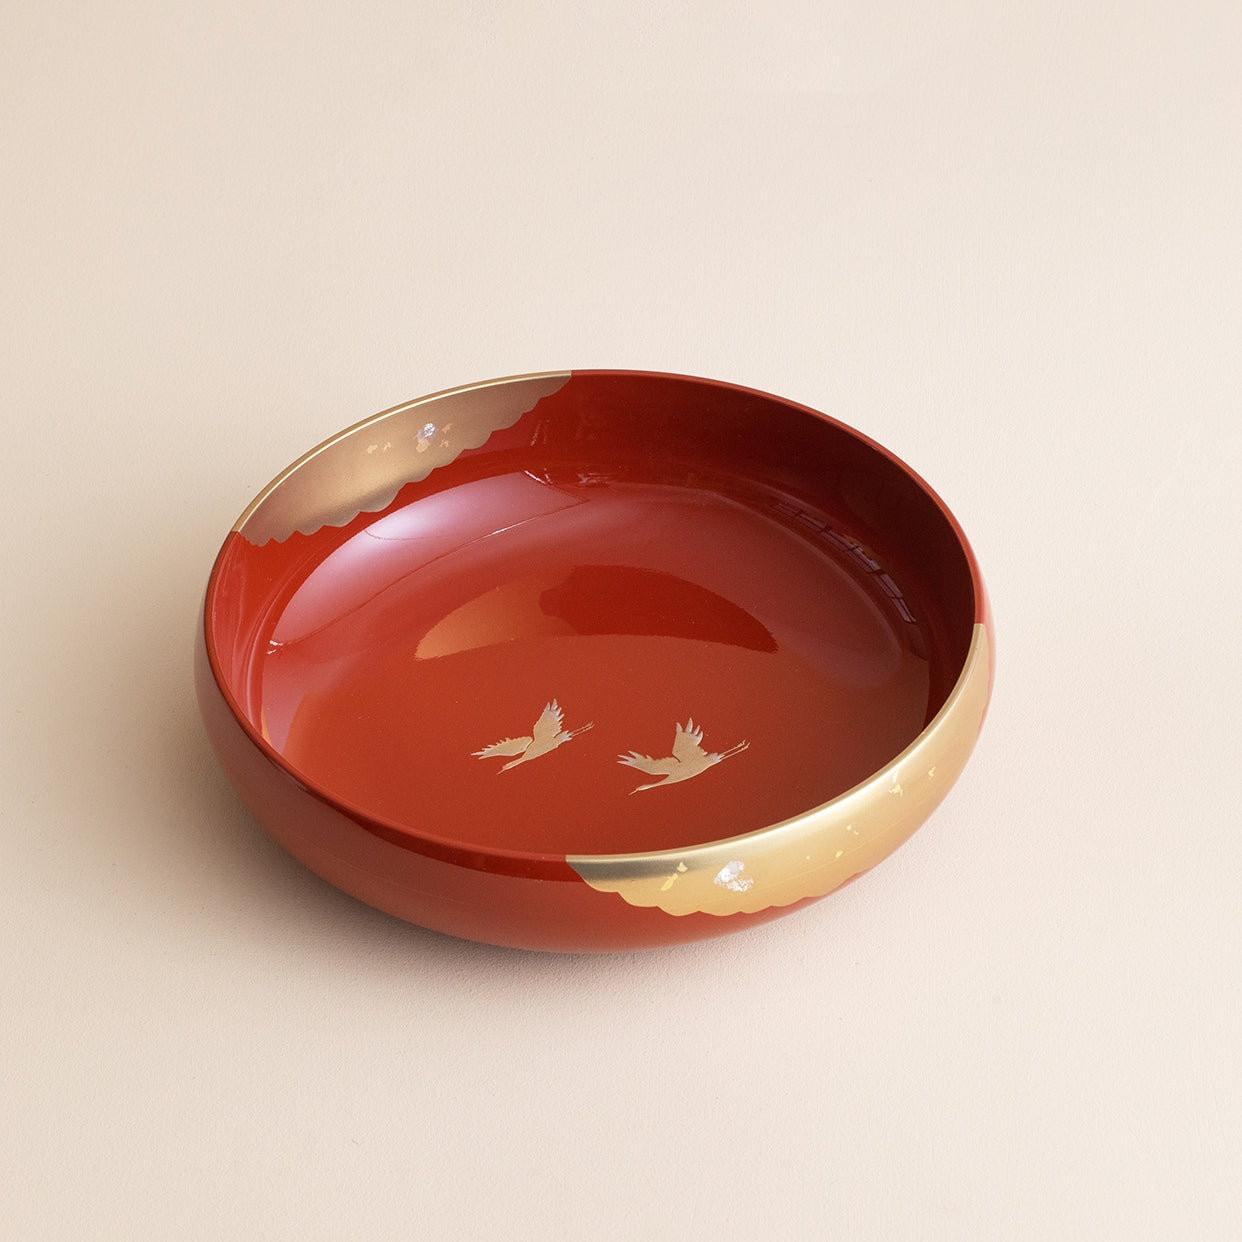 Japanese Handcrafted Circular Cranes Lacquer Resin Bowl